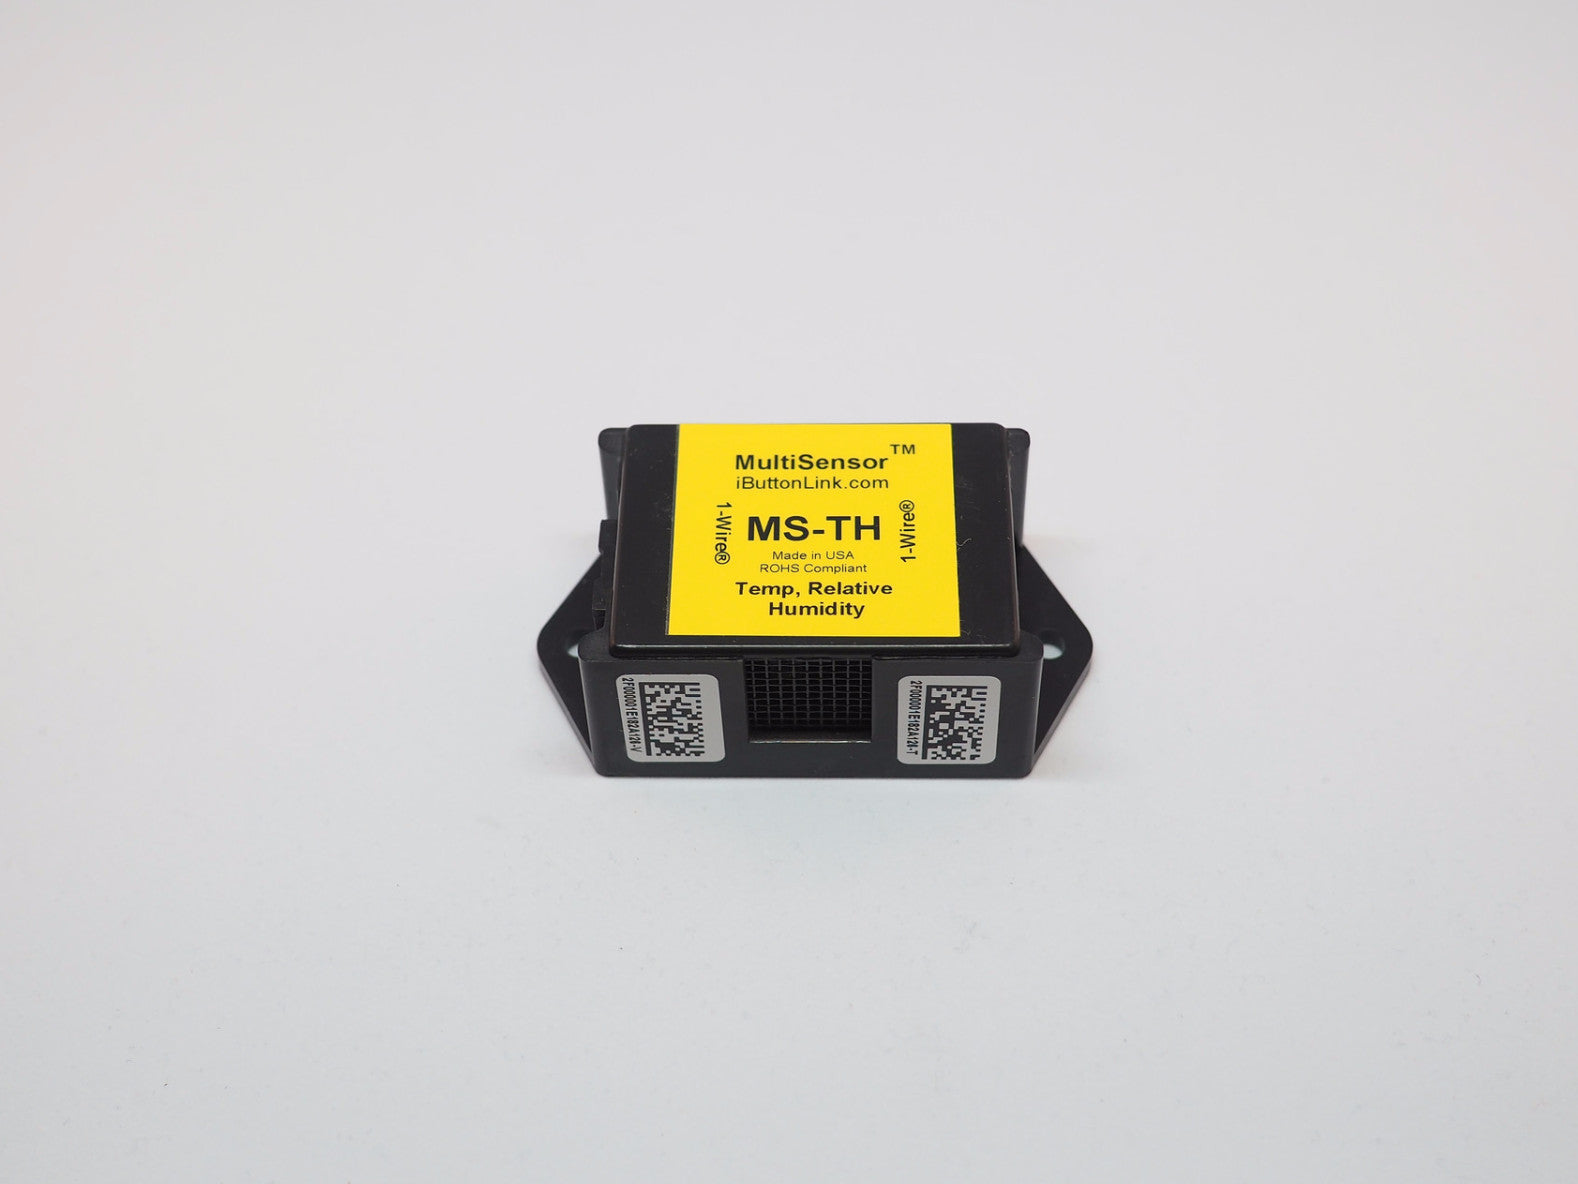 MST01 Industrial Temperature and Humidity Sensor